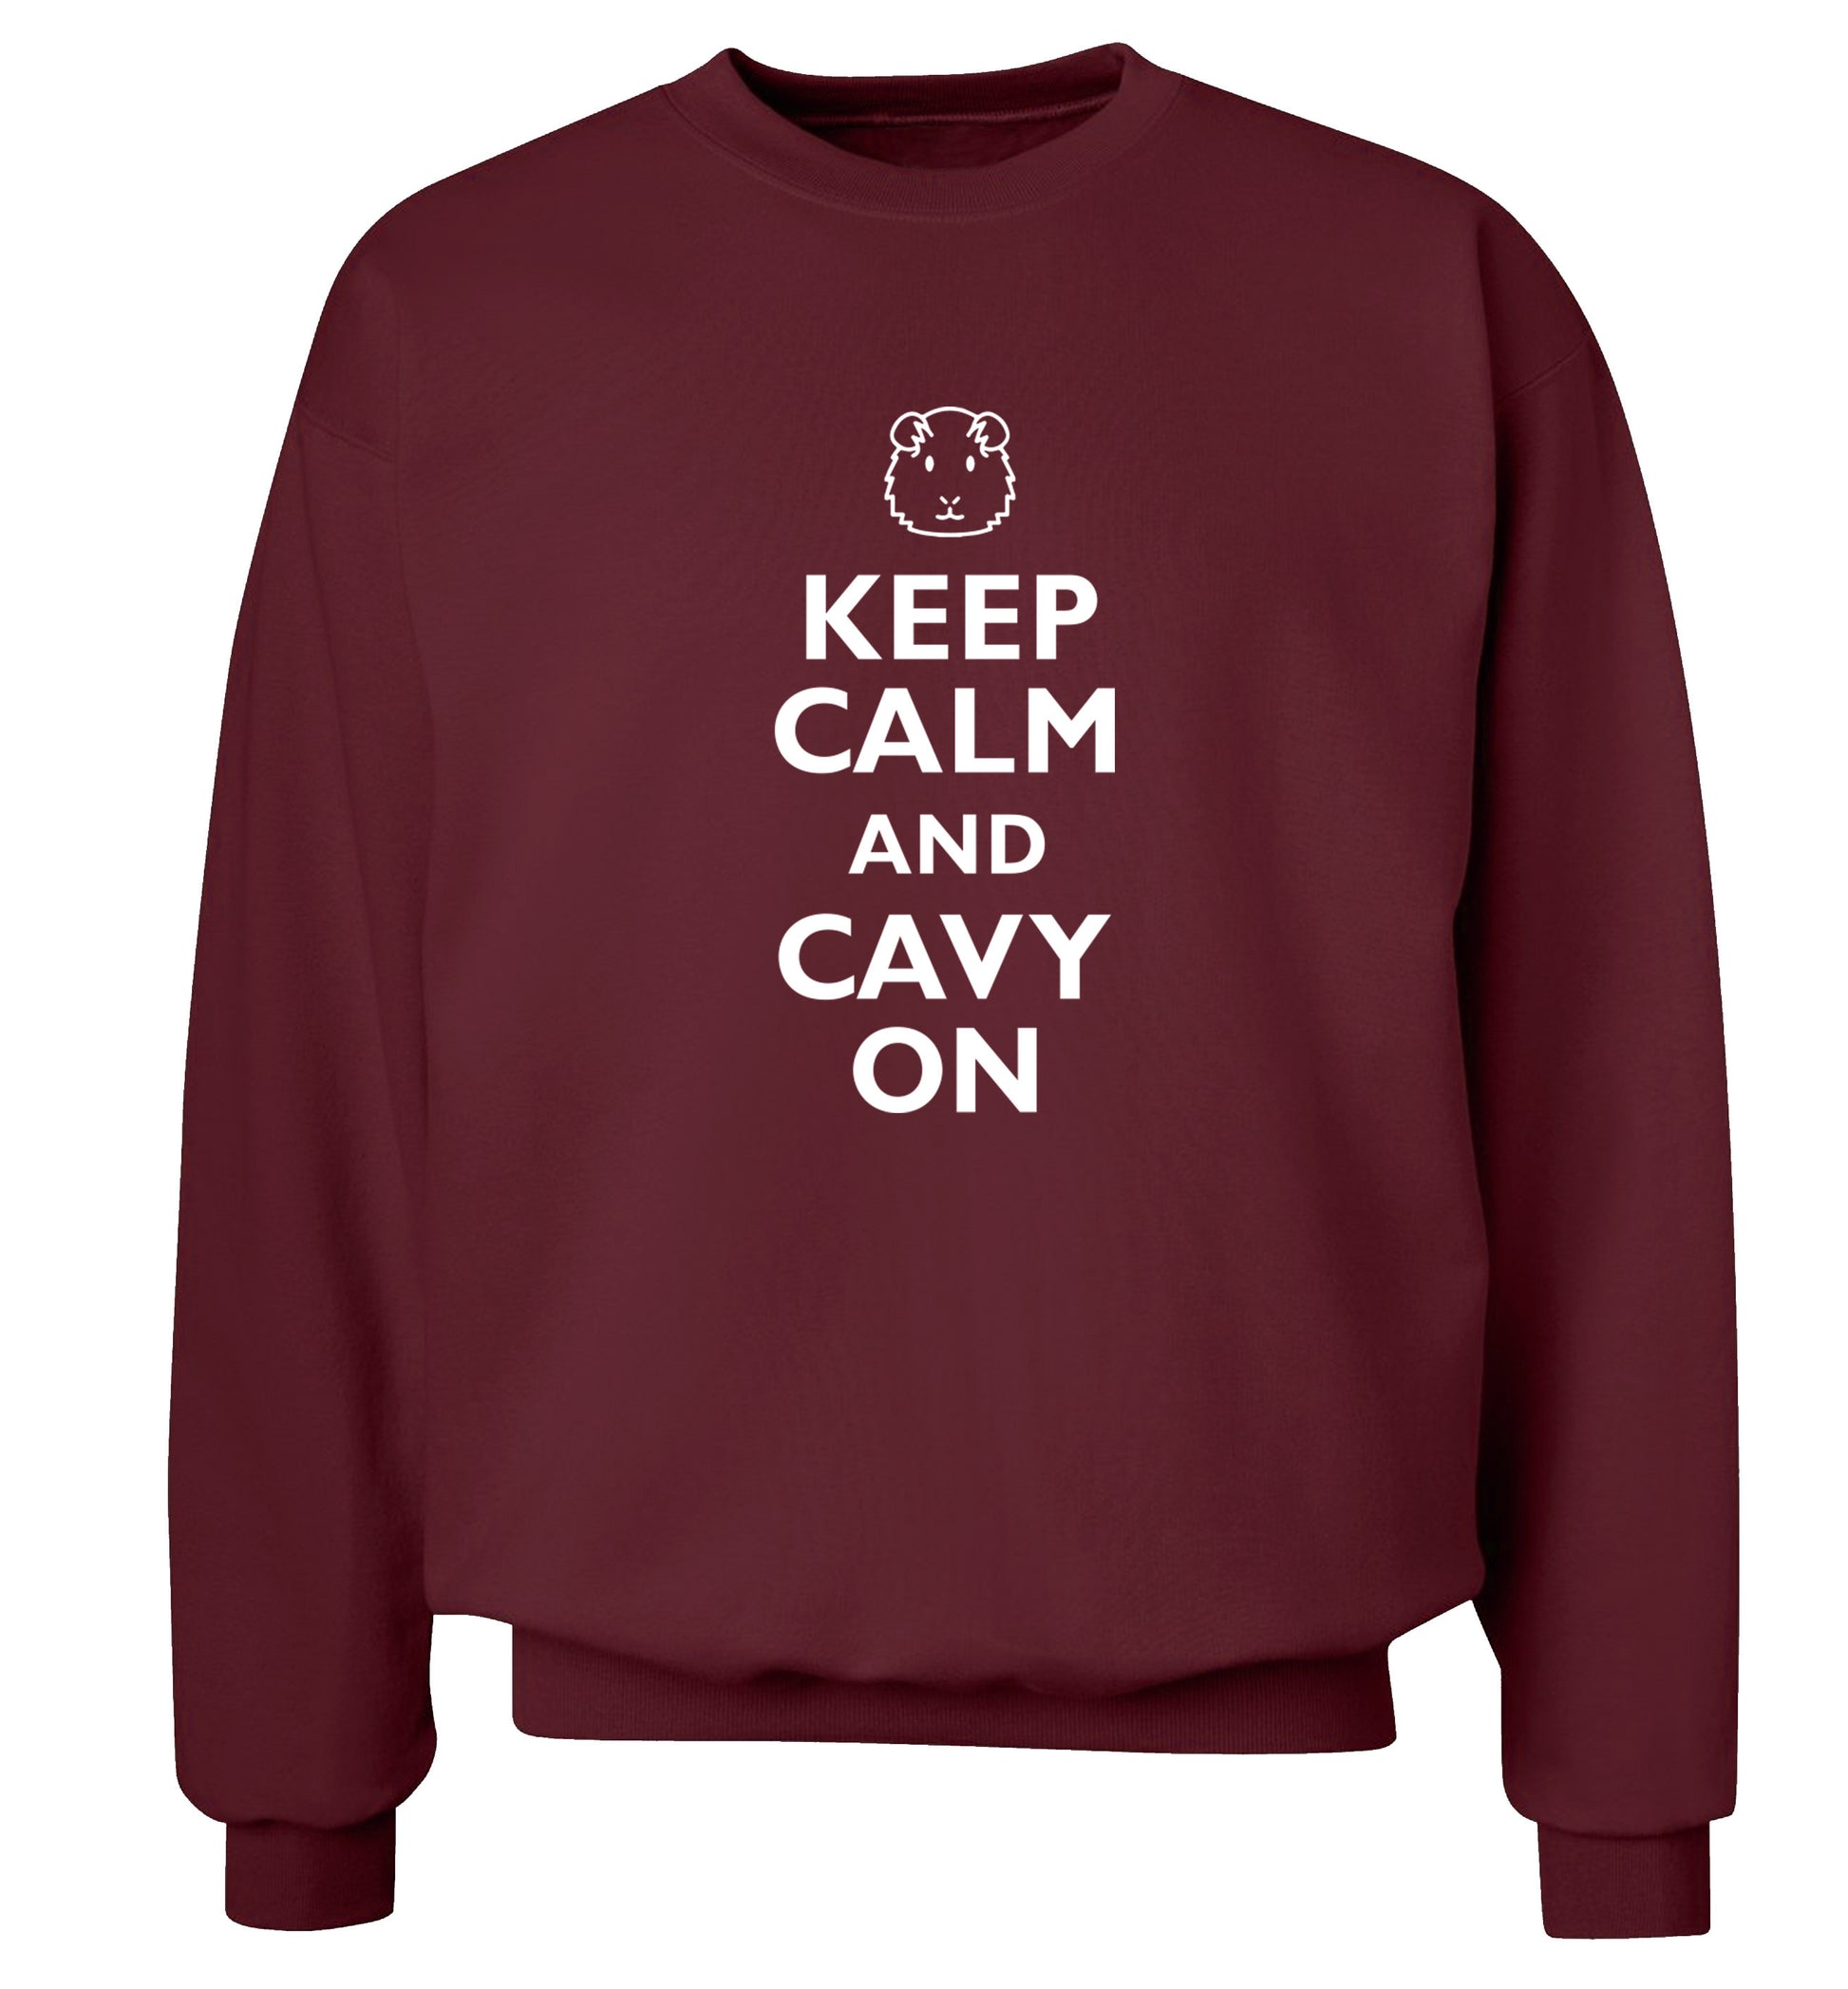 Keep calm and cavvy on Adult's unisex maroon  sweater 2XL